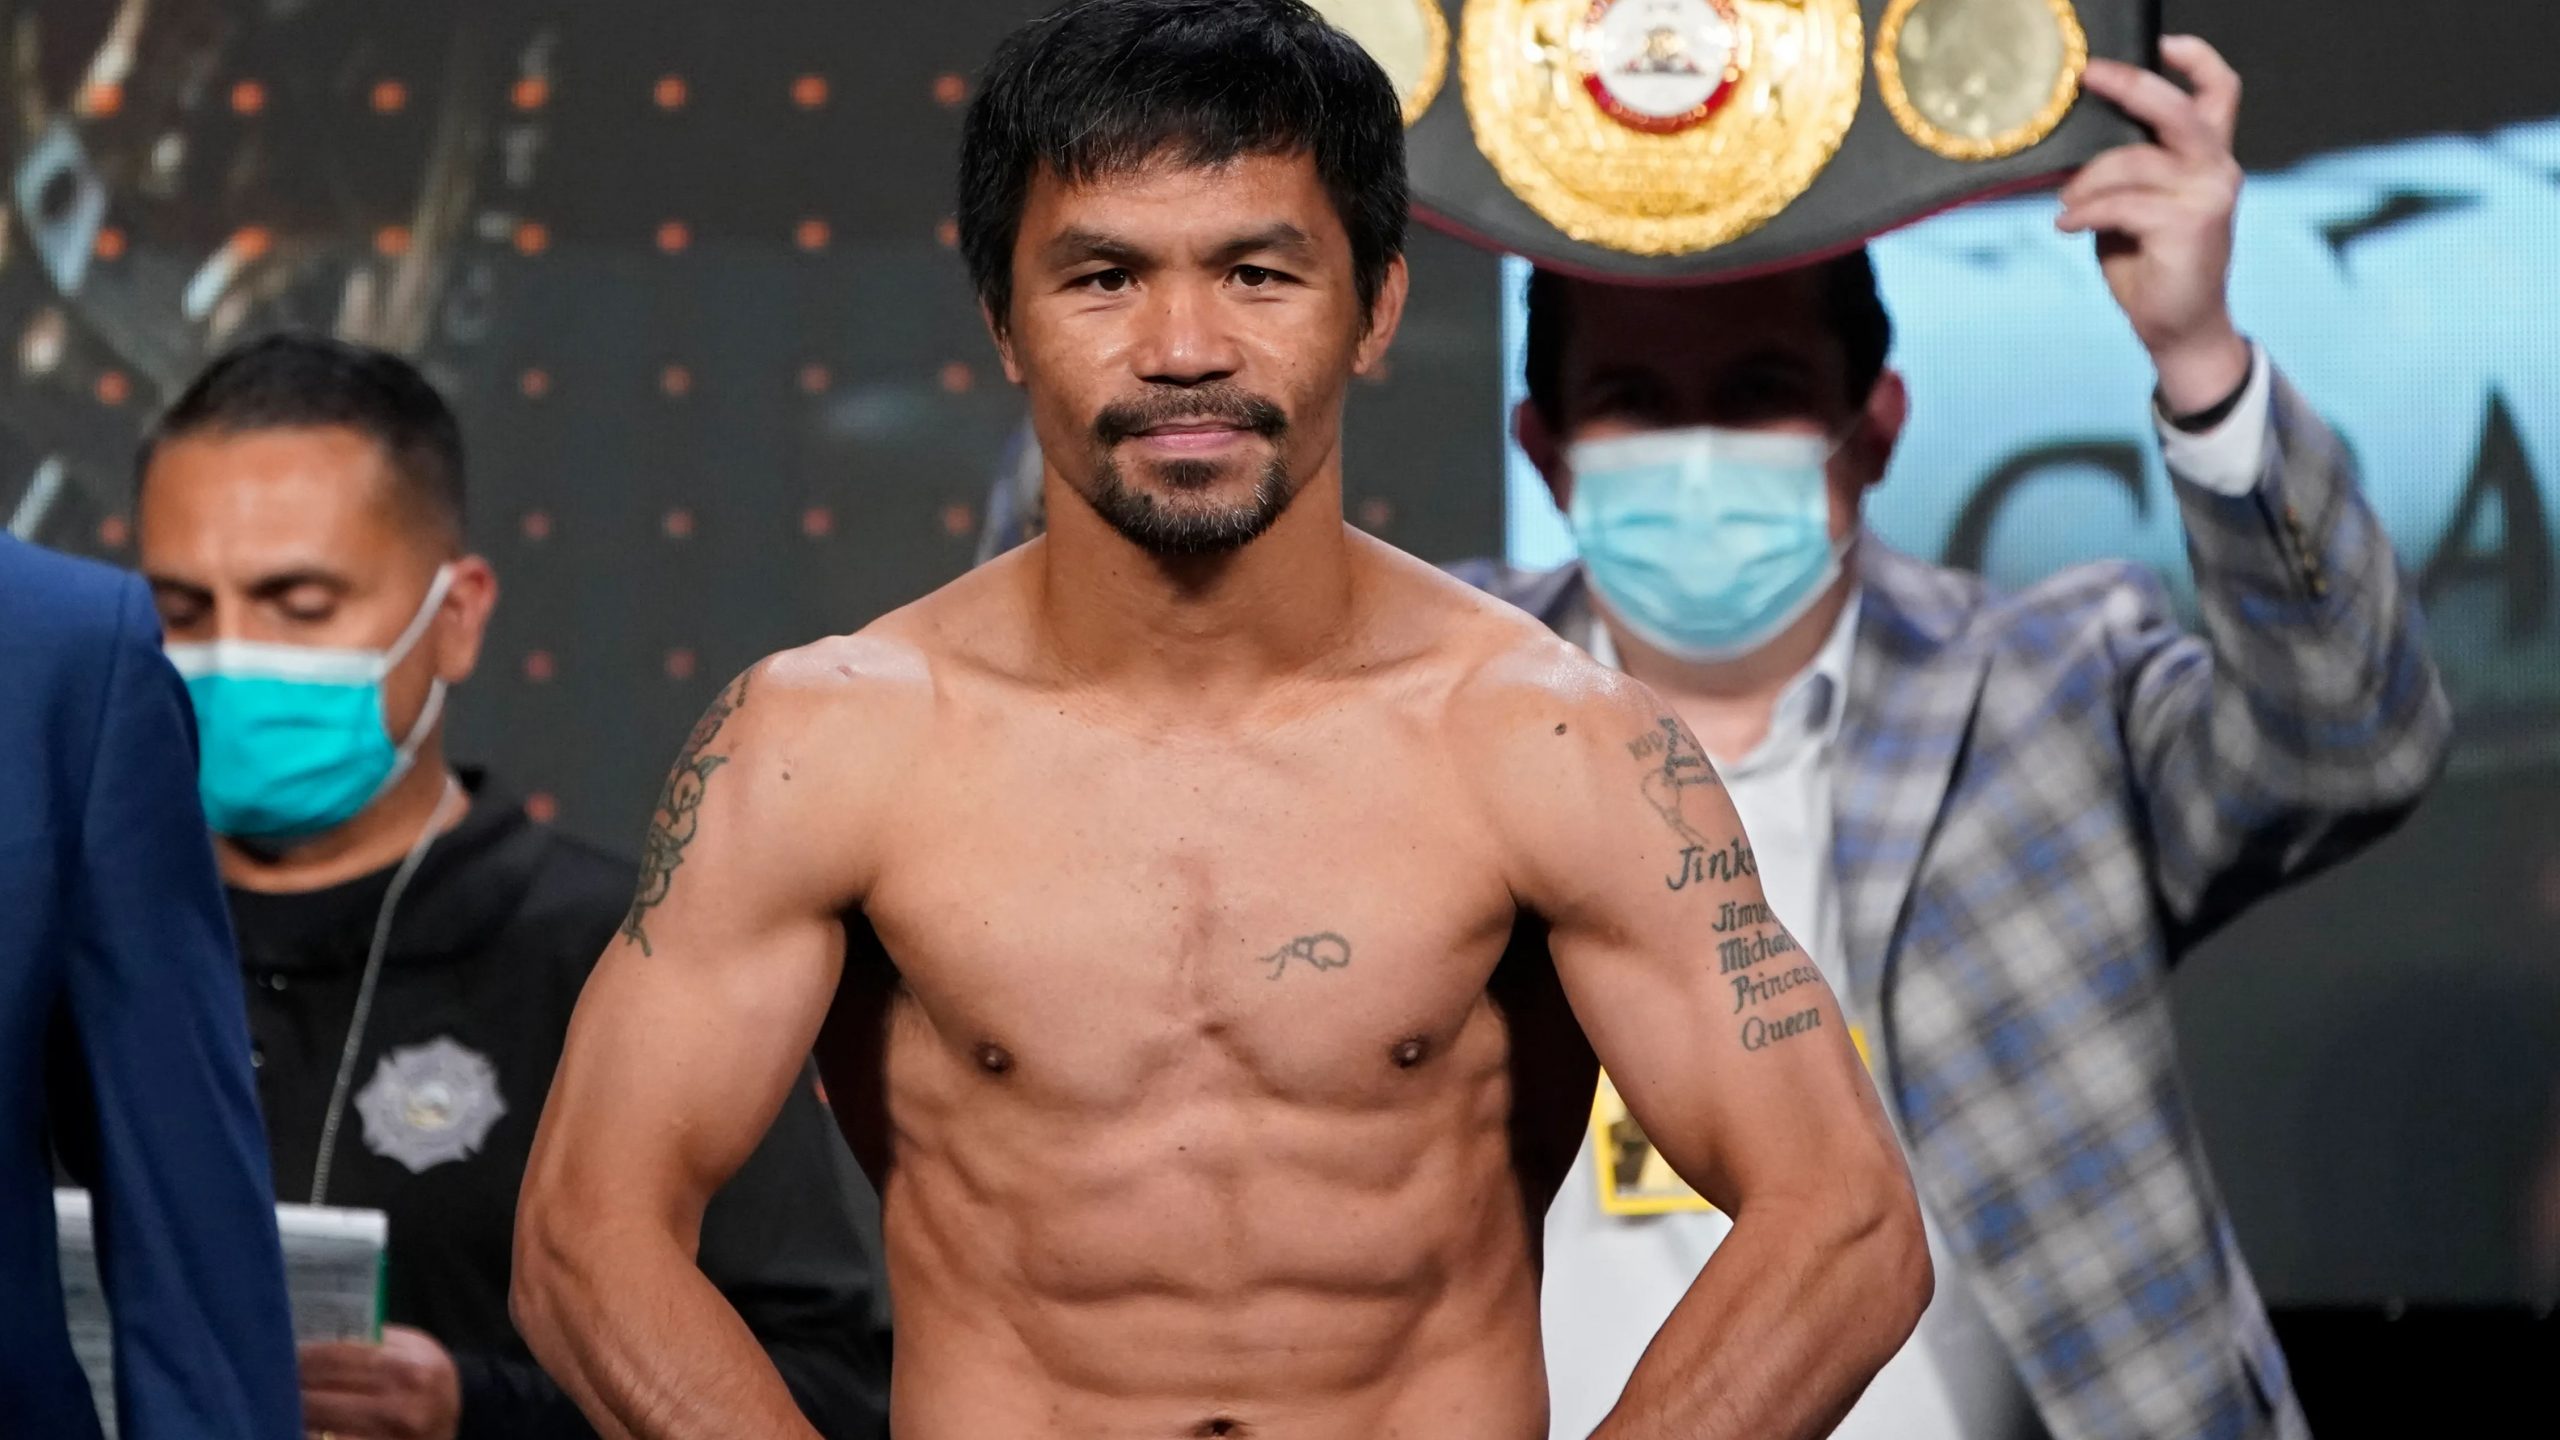 Philippines 2022 elections: Boxer Manny Pacquiao to run for president